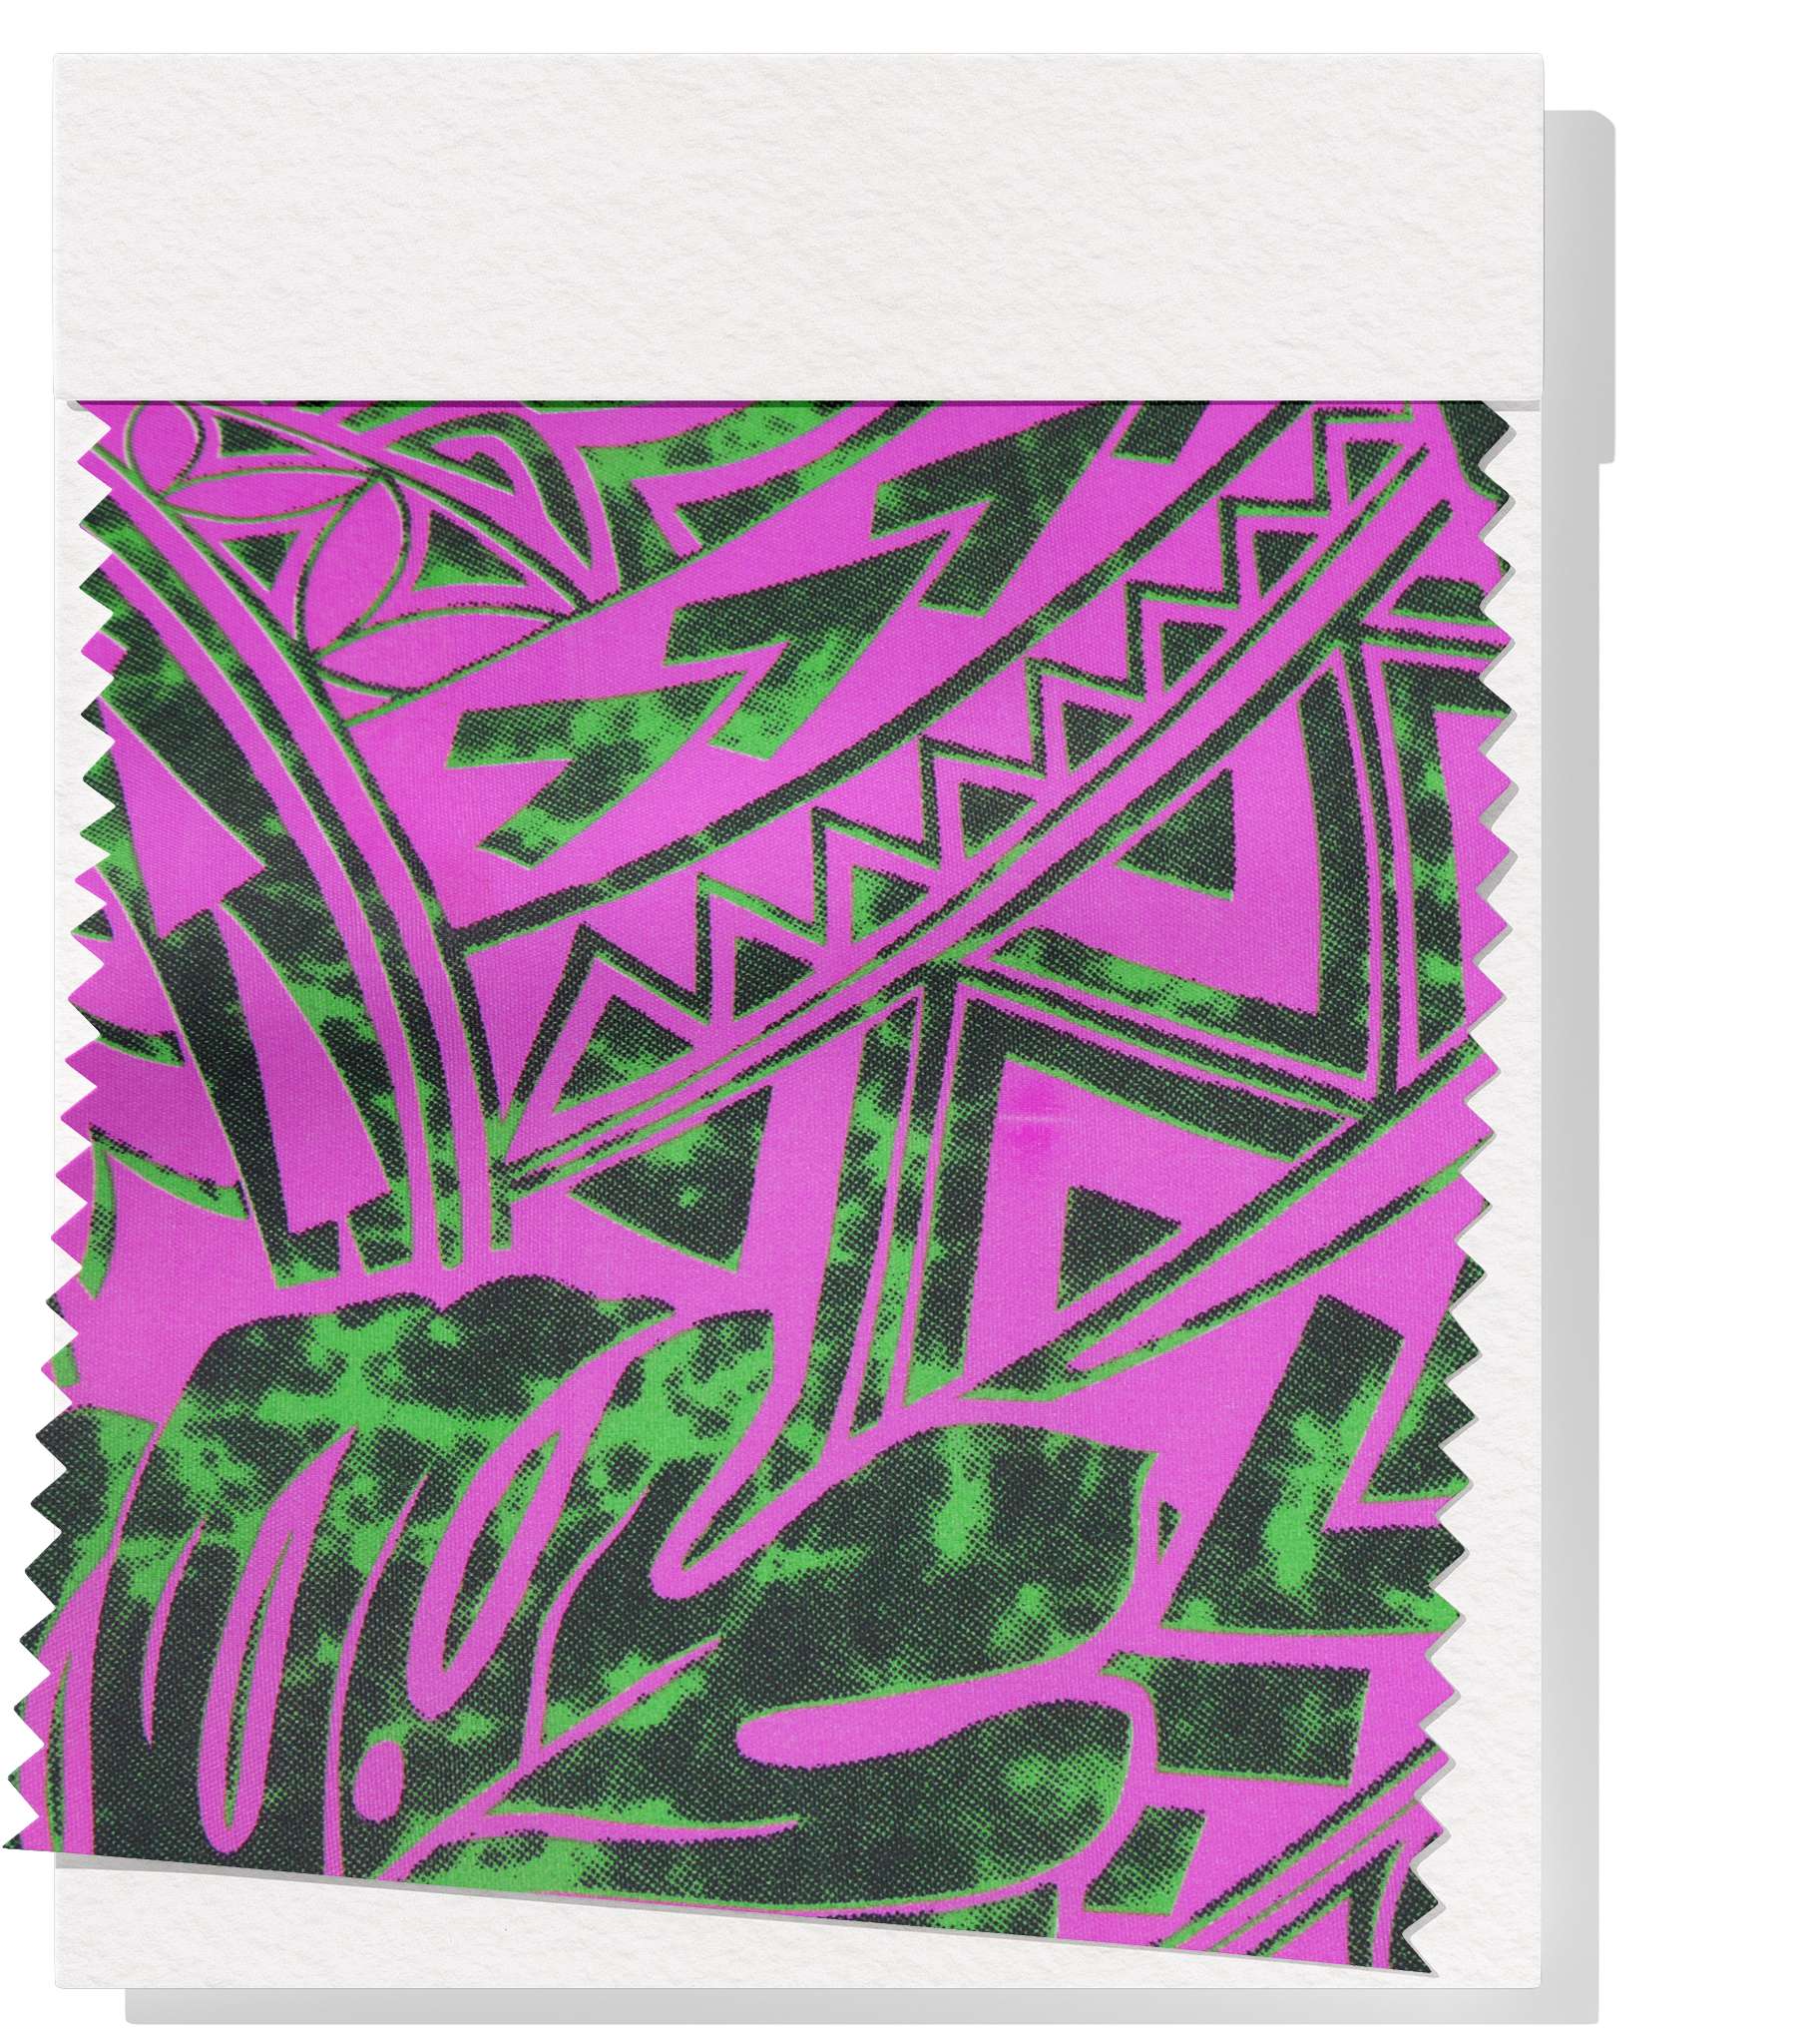 Polyester / Cotton Pacific Print $3.00p/m Design #3 - Pink